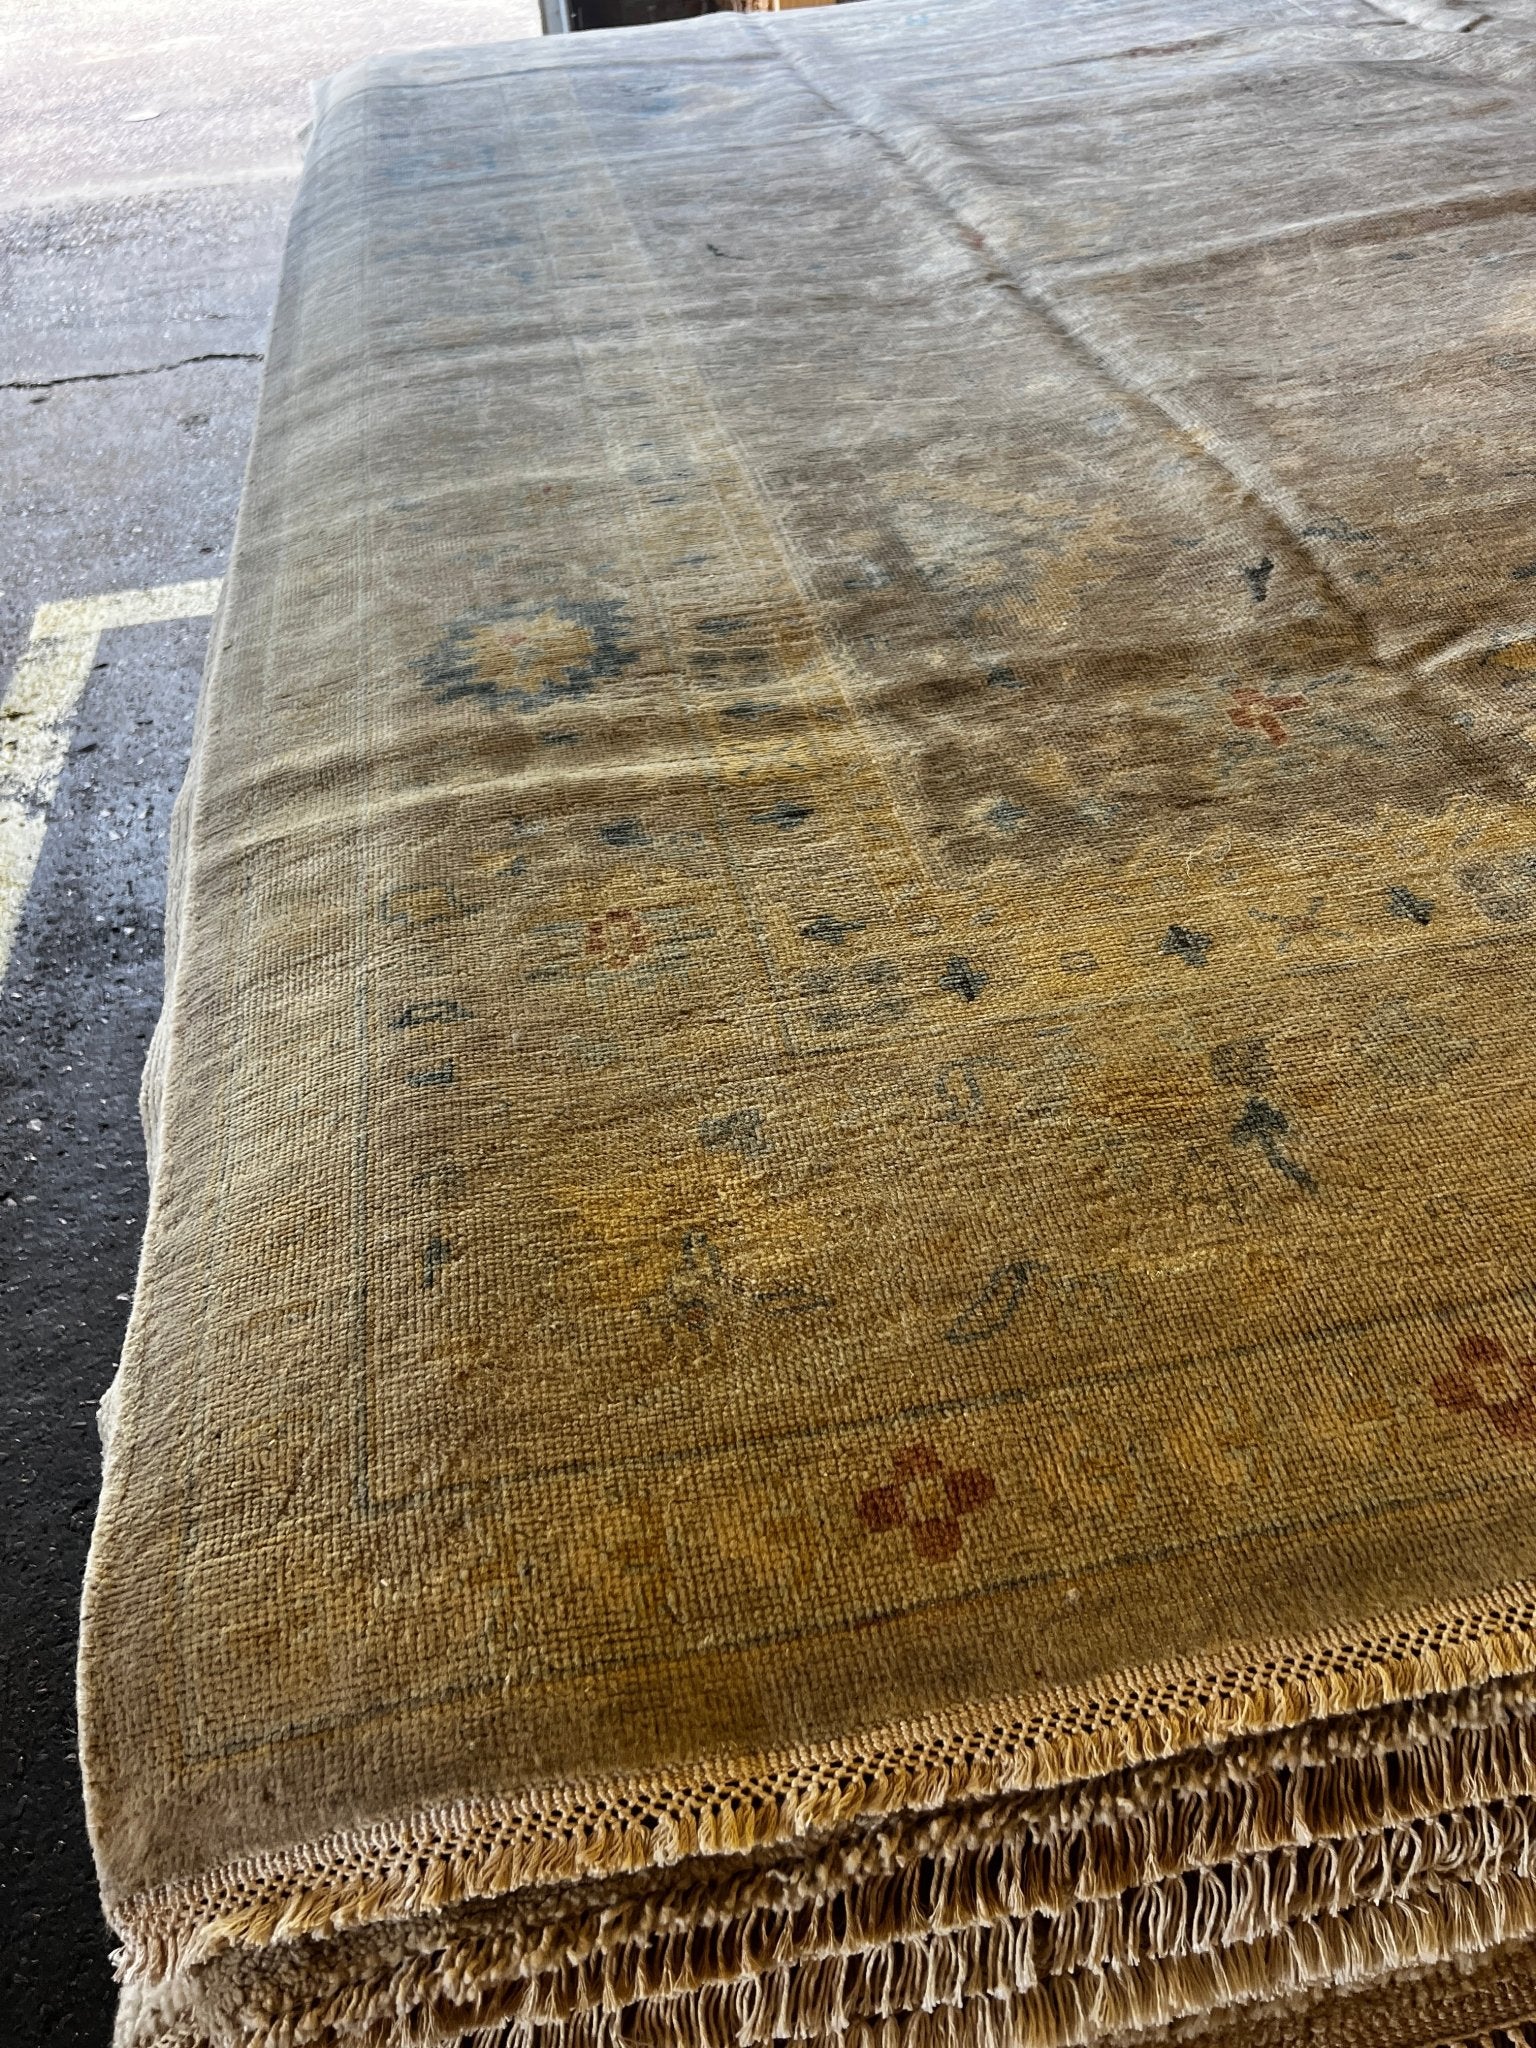 Tom & Marie 9x12 Homage to Antique Hand-Knotted Rug | Banana Manor Rug Factory Outlet